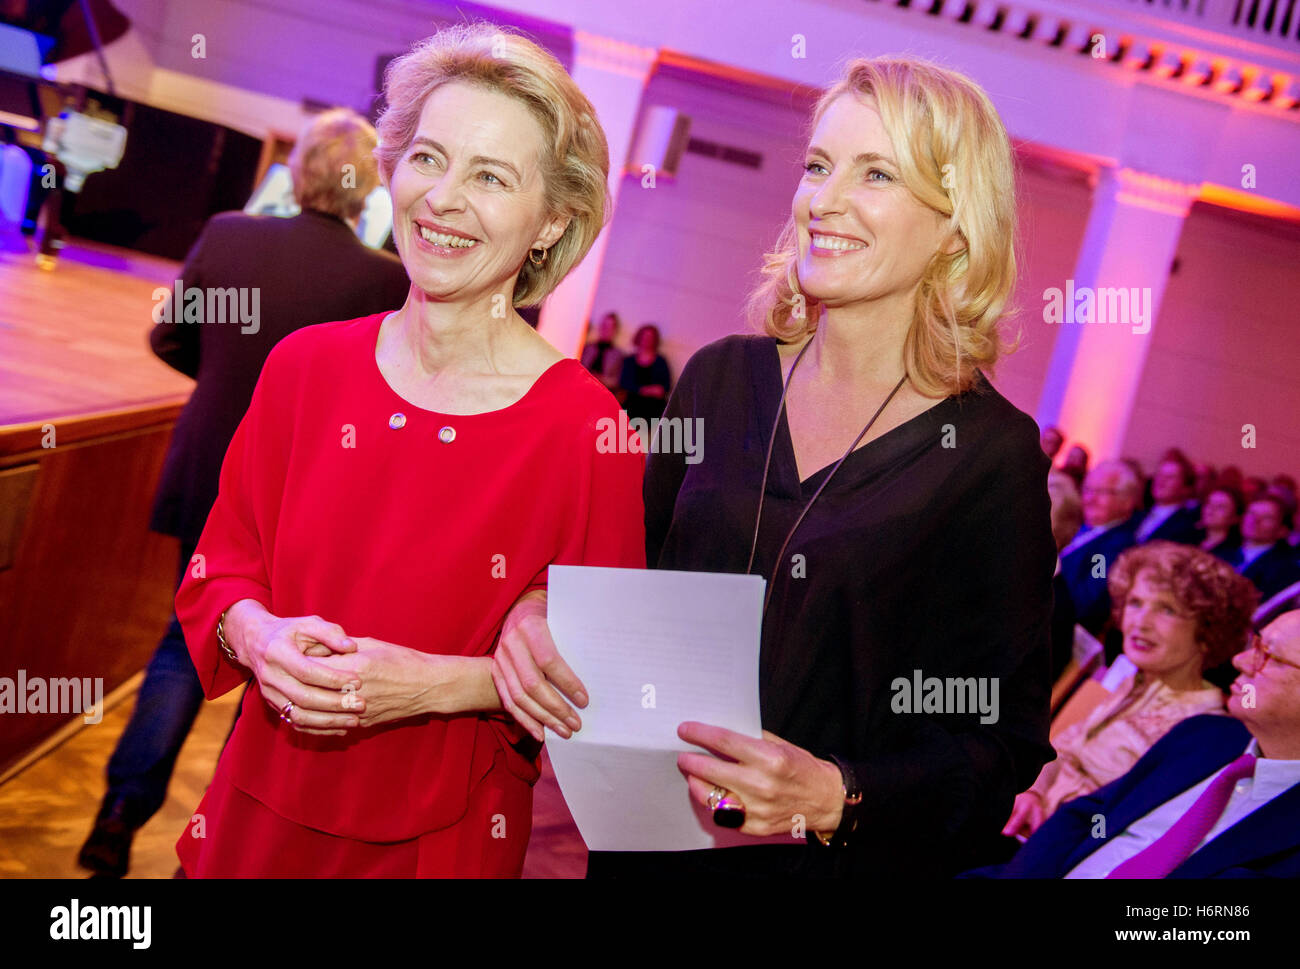 Actress Maria Furtwaengler (R) arrives on stage with the Federal Defence Minister Ursula von der Leyen (L) to receive the Leibniz-Ring in Hanover, Germany 31 October 2016. Furtwaengler received the Leibniz-Ring of the press club Hanover for her work against child abuse. Several days before the ceremony the ready-made gem was stolen. Photo: Hauke-Christian Dittrich/dpa Stock Photo